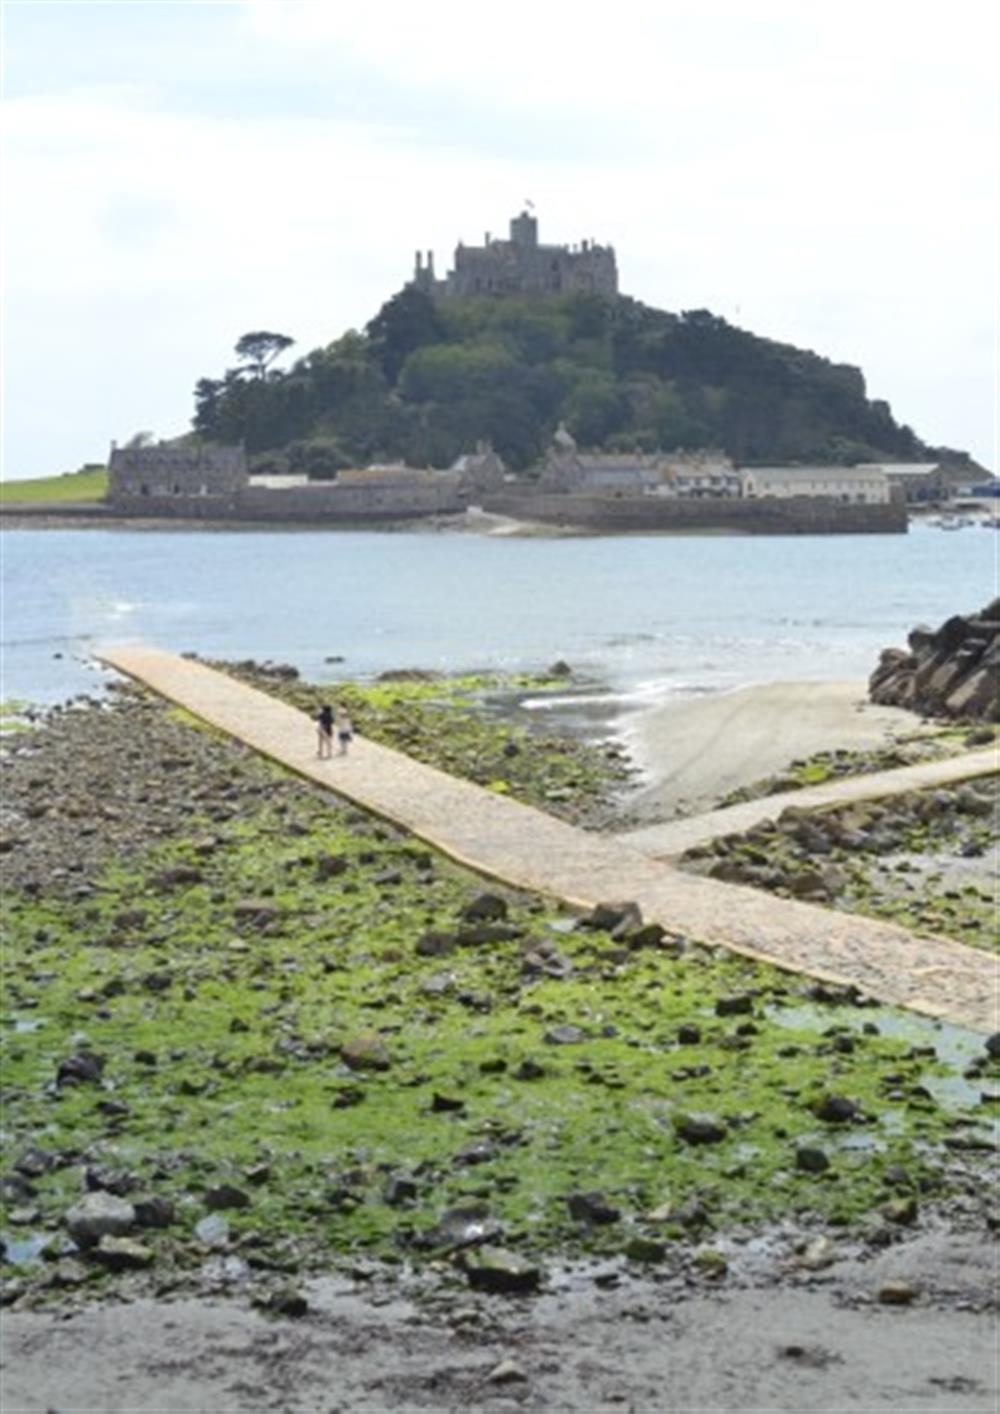 St Michael's Mount is about an hour away. Walk across the causeway (if the tide is out!) or catch the ferry across.